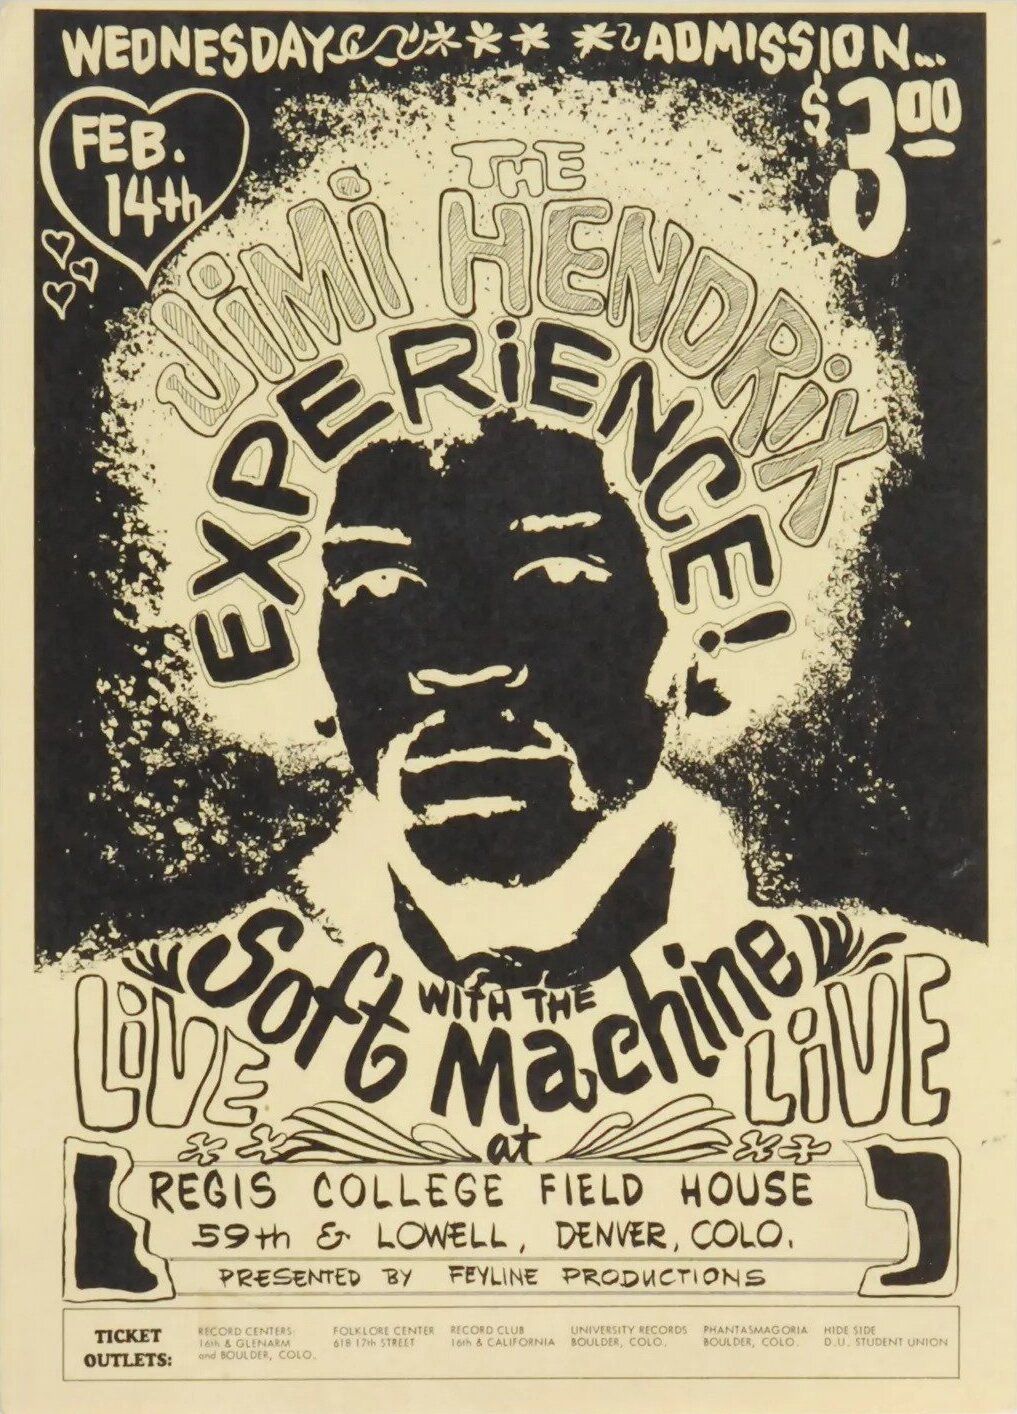 1968-Regis College Field House-Jimi Hendrix Experience Concert Poster